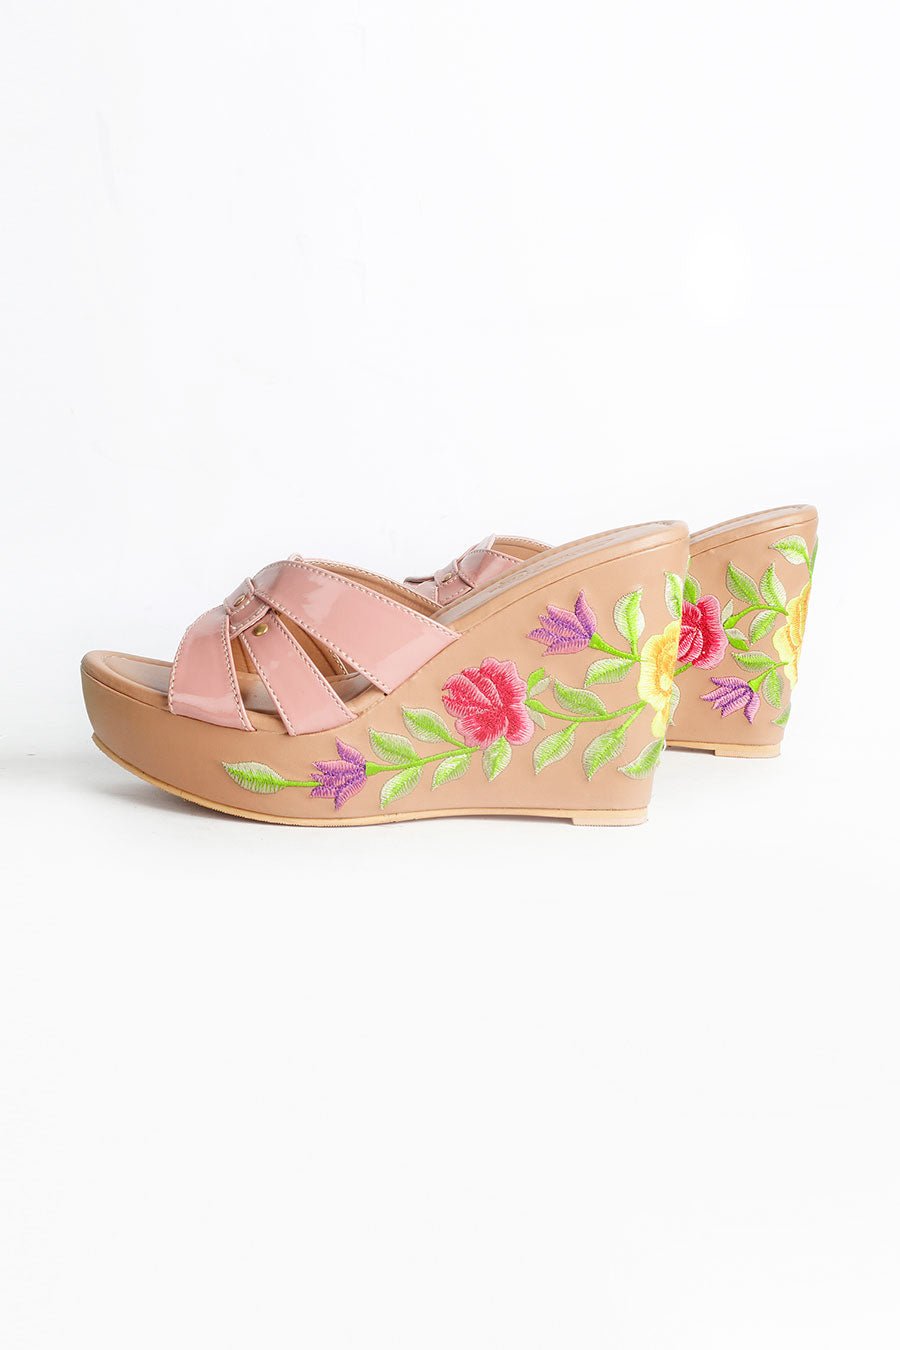 Fiorella Hand Embroidered Wedges